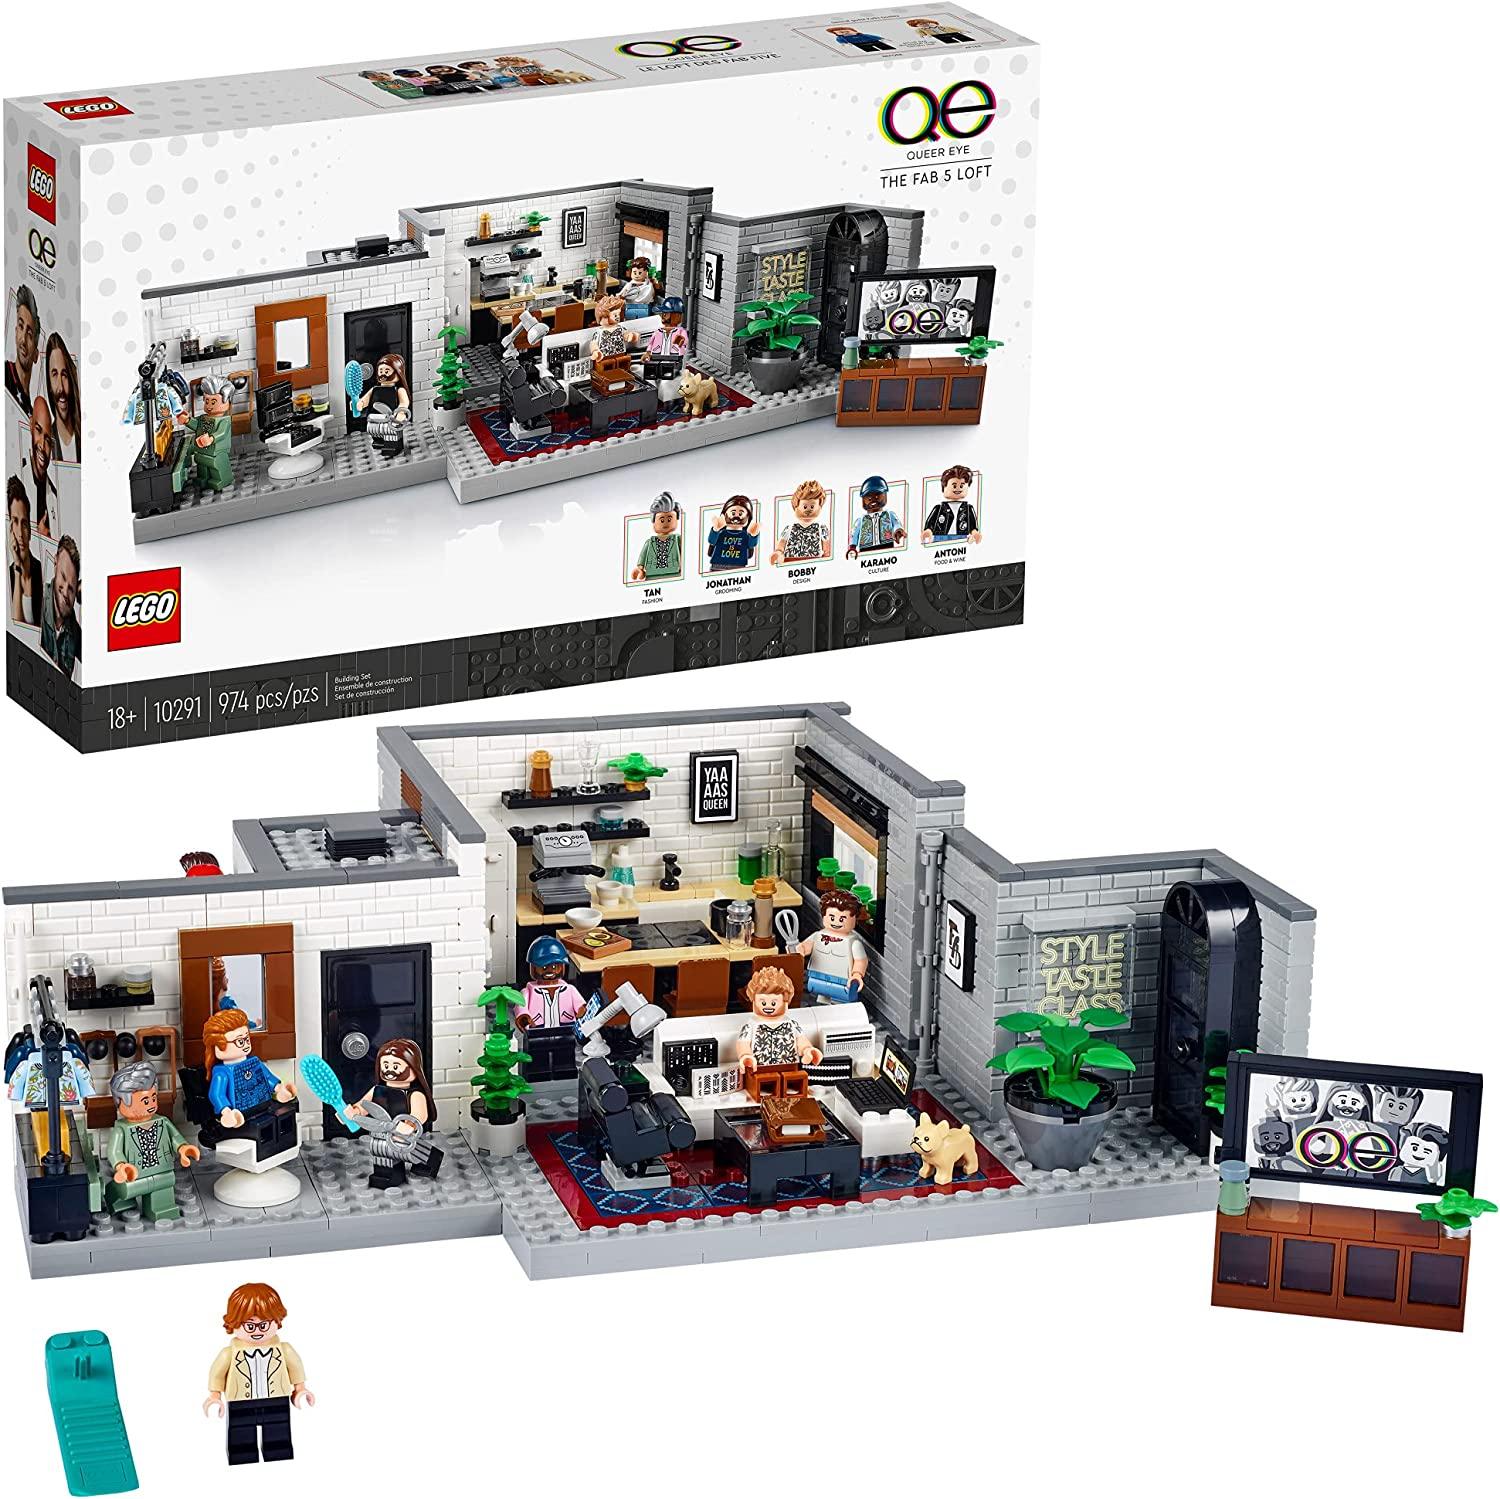 LEGO Queer Eye The Fab 5 Loft 10291 for $59.99 Shipped